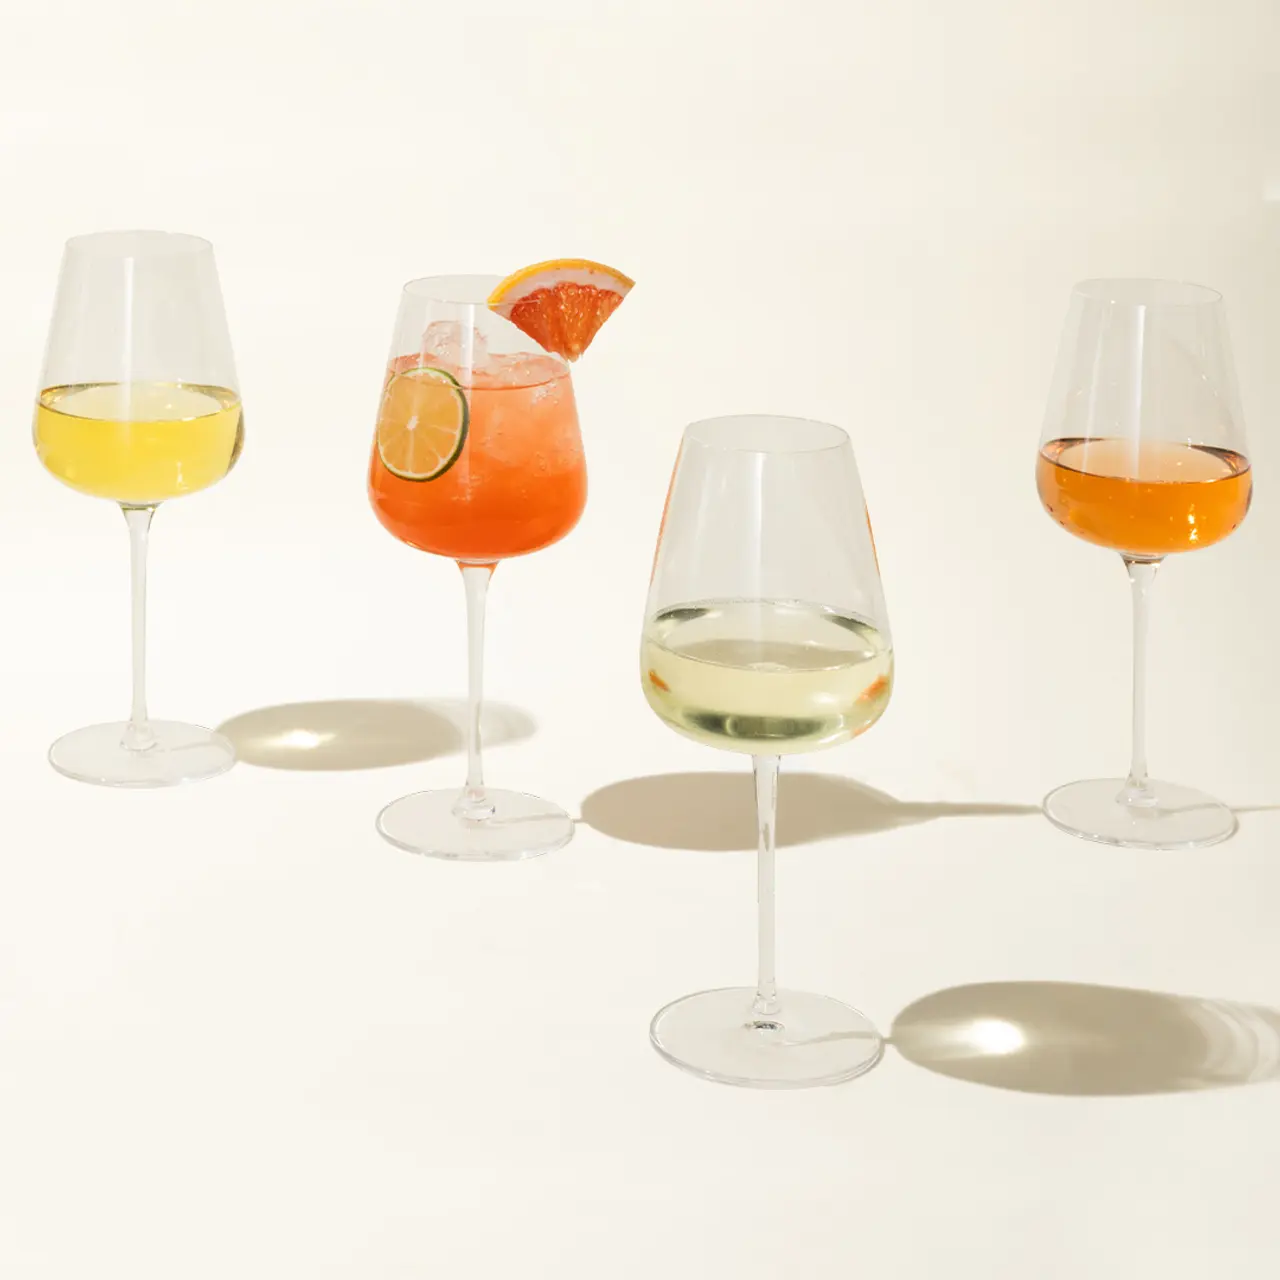 Four wine glasses with varying shades of beverages are lined up casting shadows on a light surface.